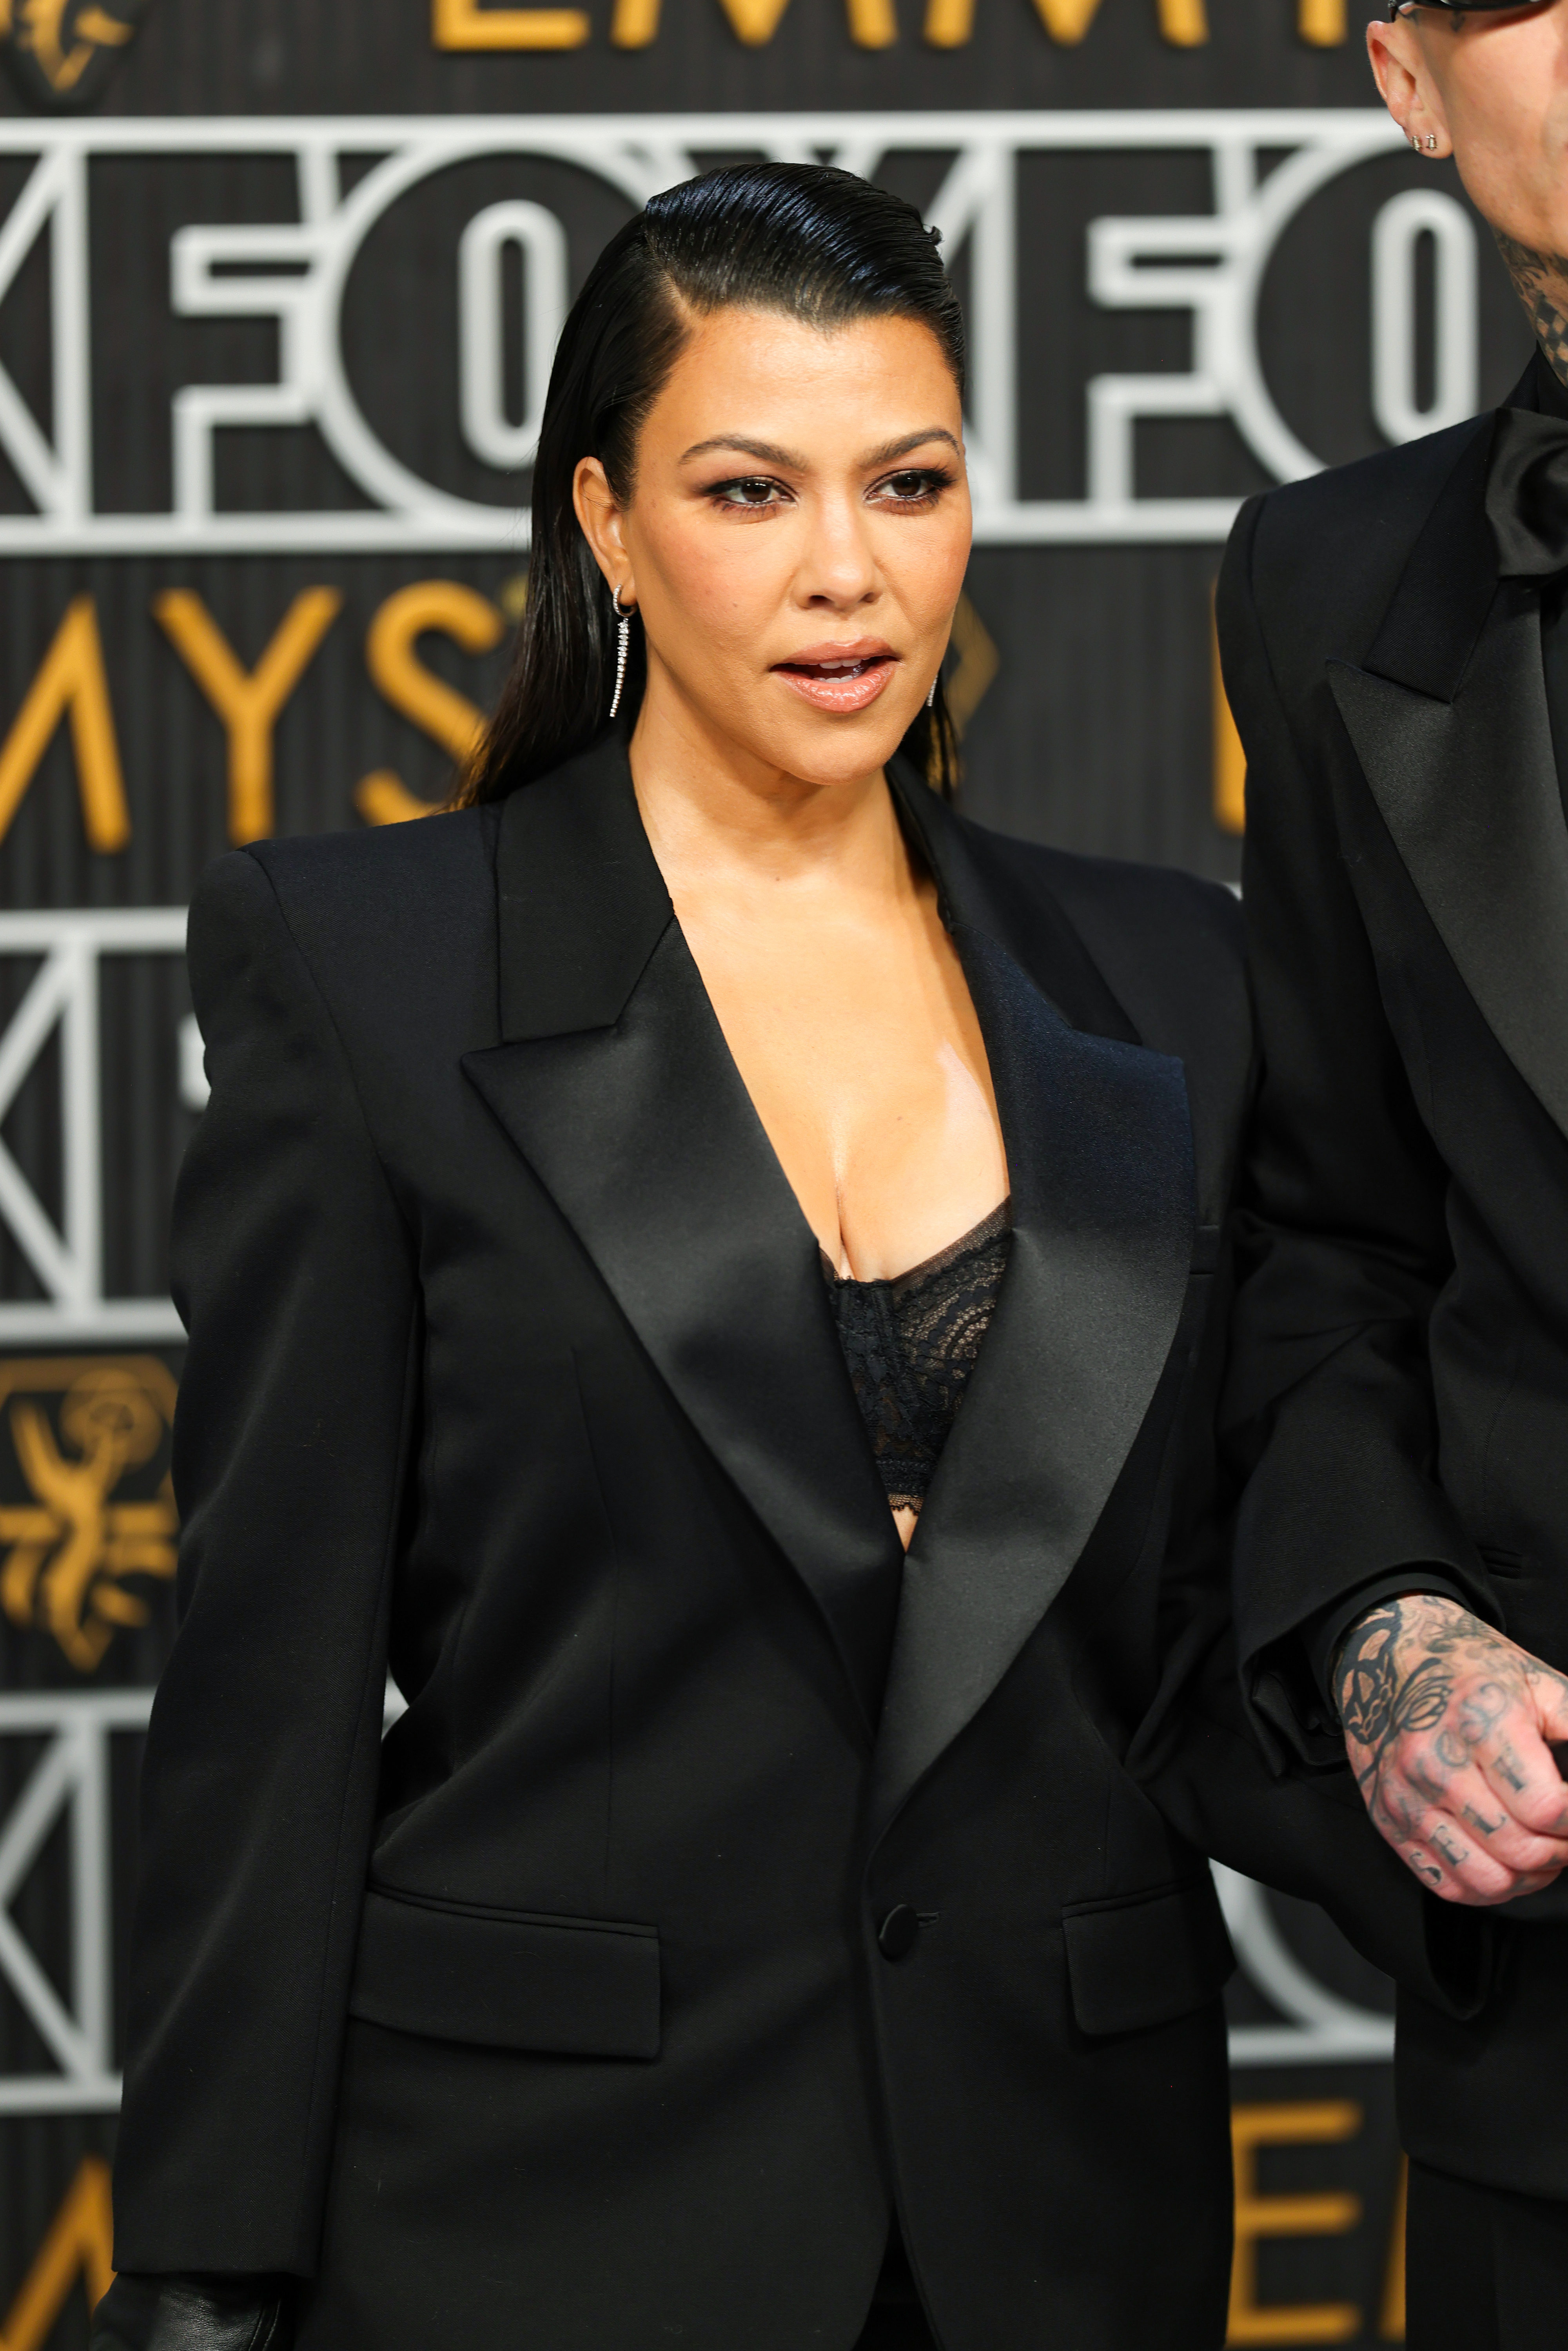 Kourtney in a suit with a plunging neckline, standing next to Travis at a media event